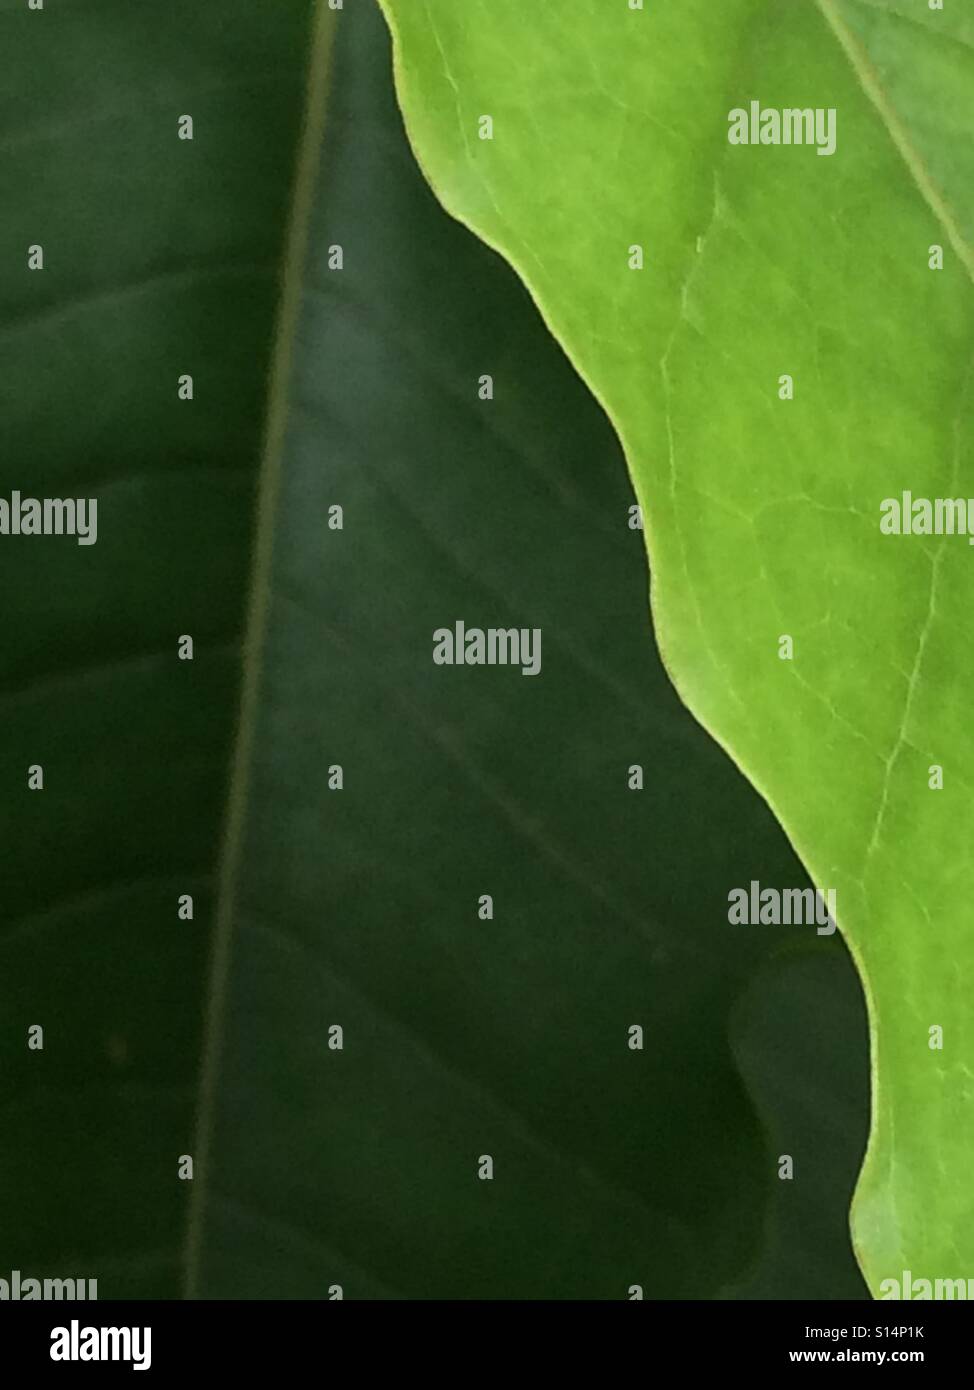 Overlapping green leaves of contrasting shades. Stock Photo